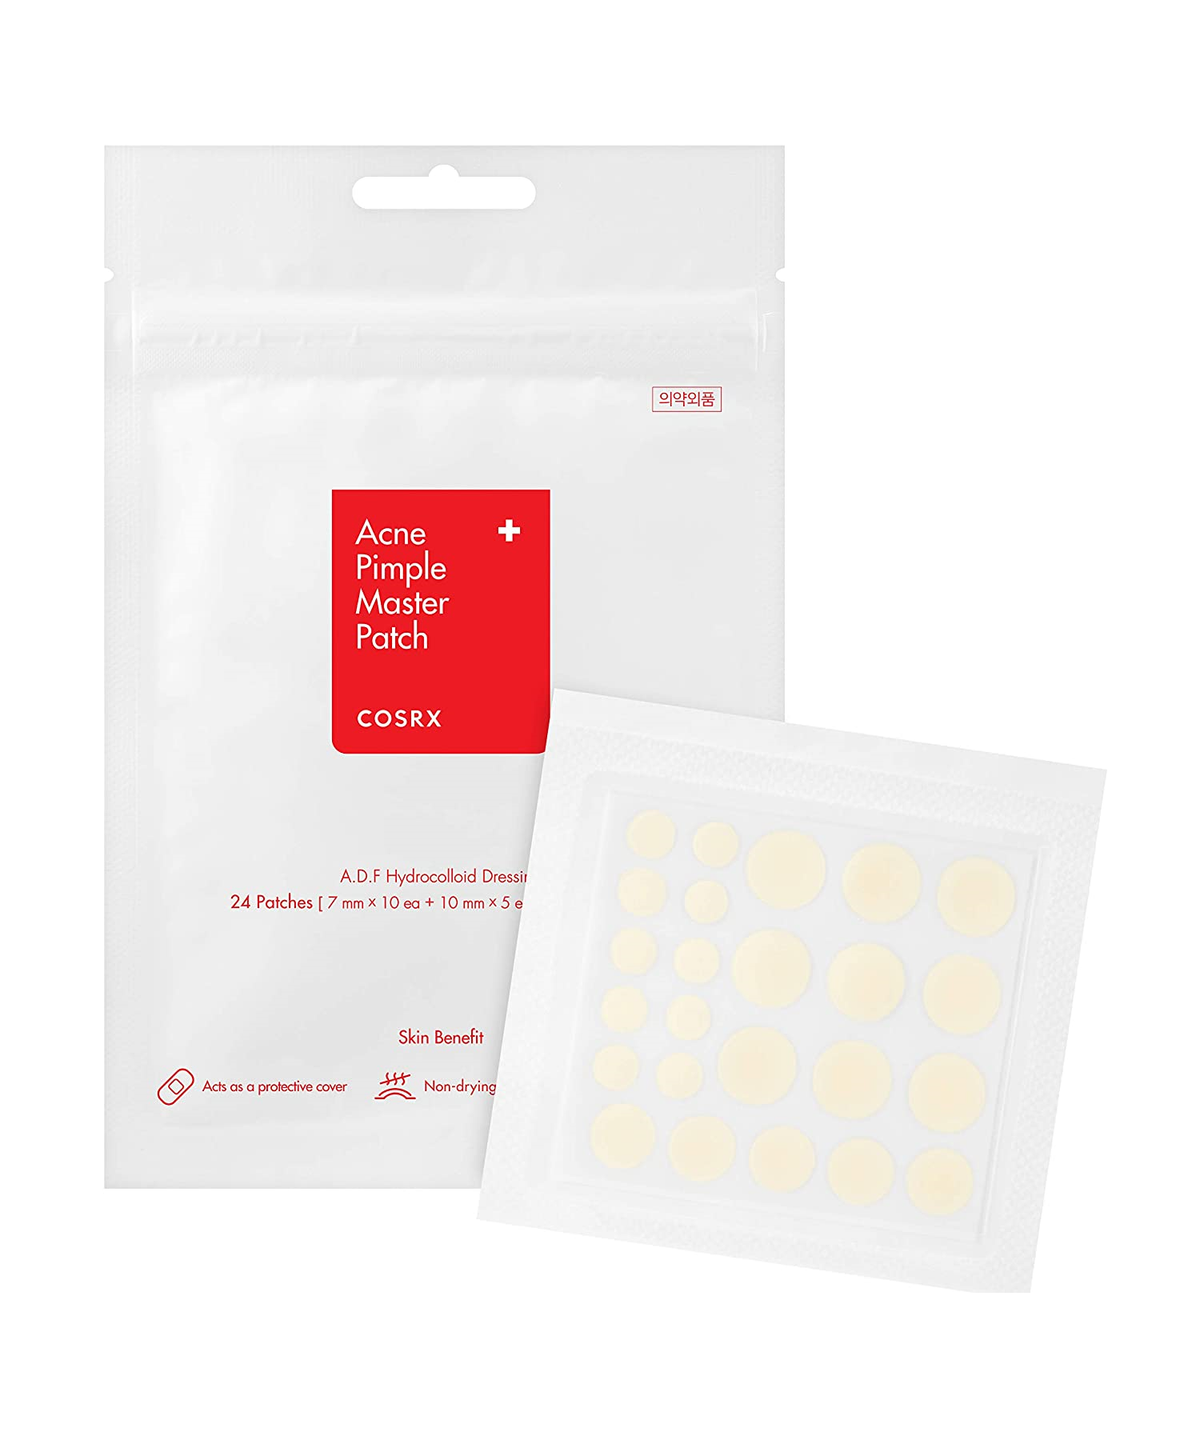 COSRX Acne Pimple Master Patch (24 patches) at Shopey in Dubai, Abu Dhabi and all UAE